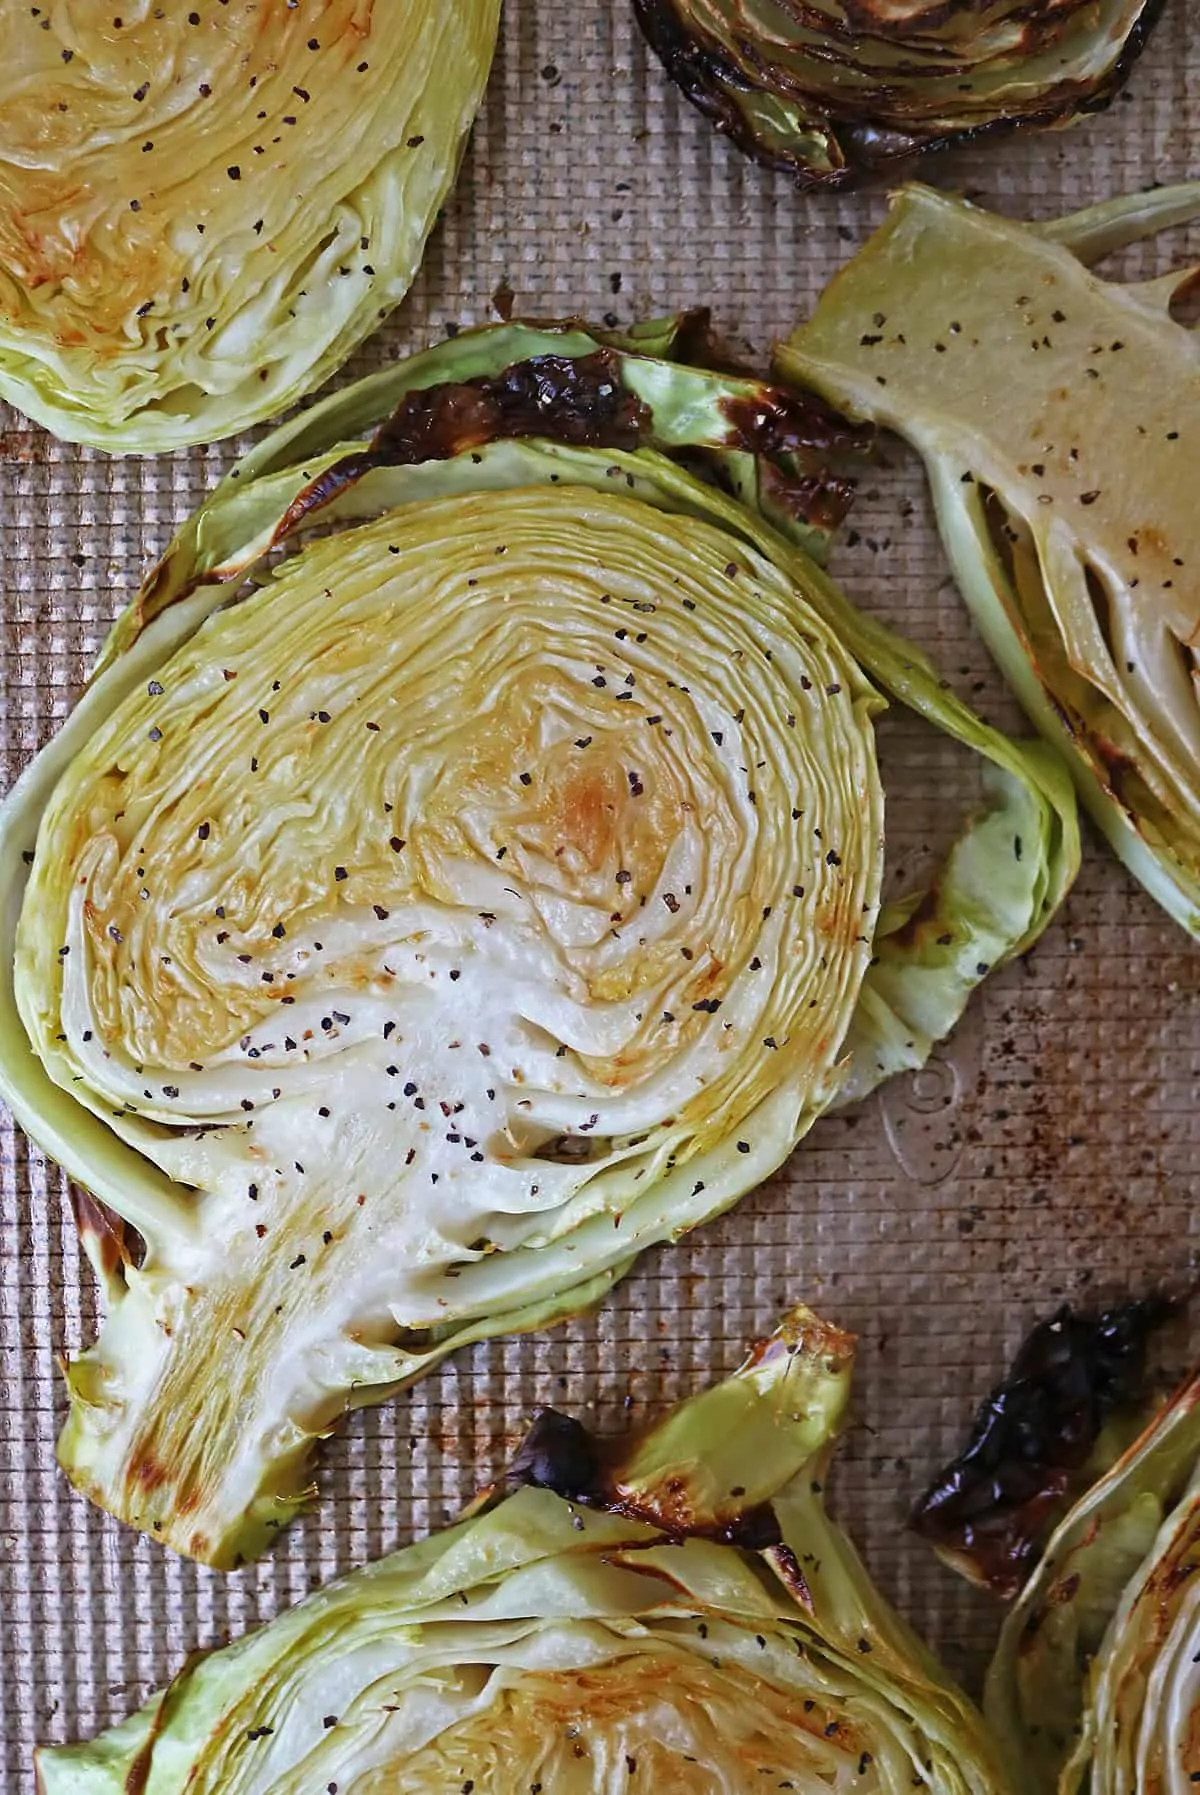 Crispy Delicious Roasted Cabbage steaks for a tasty side dish.